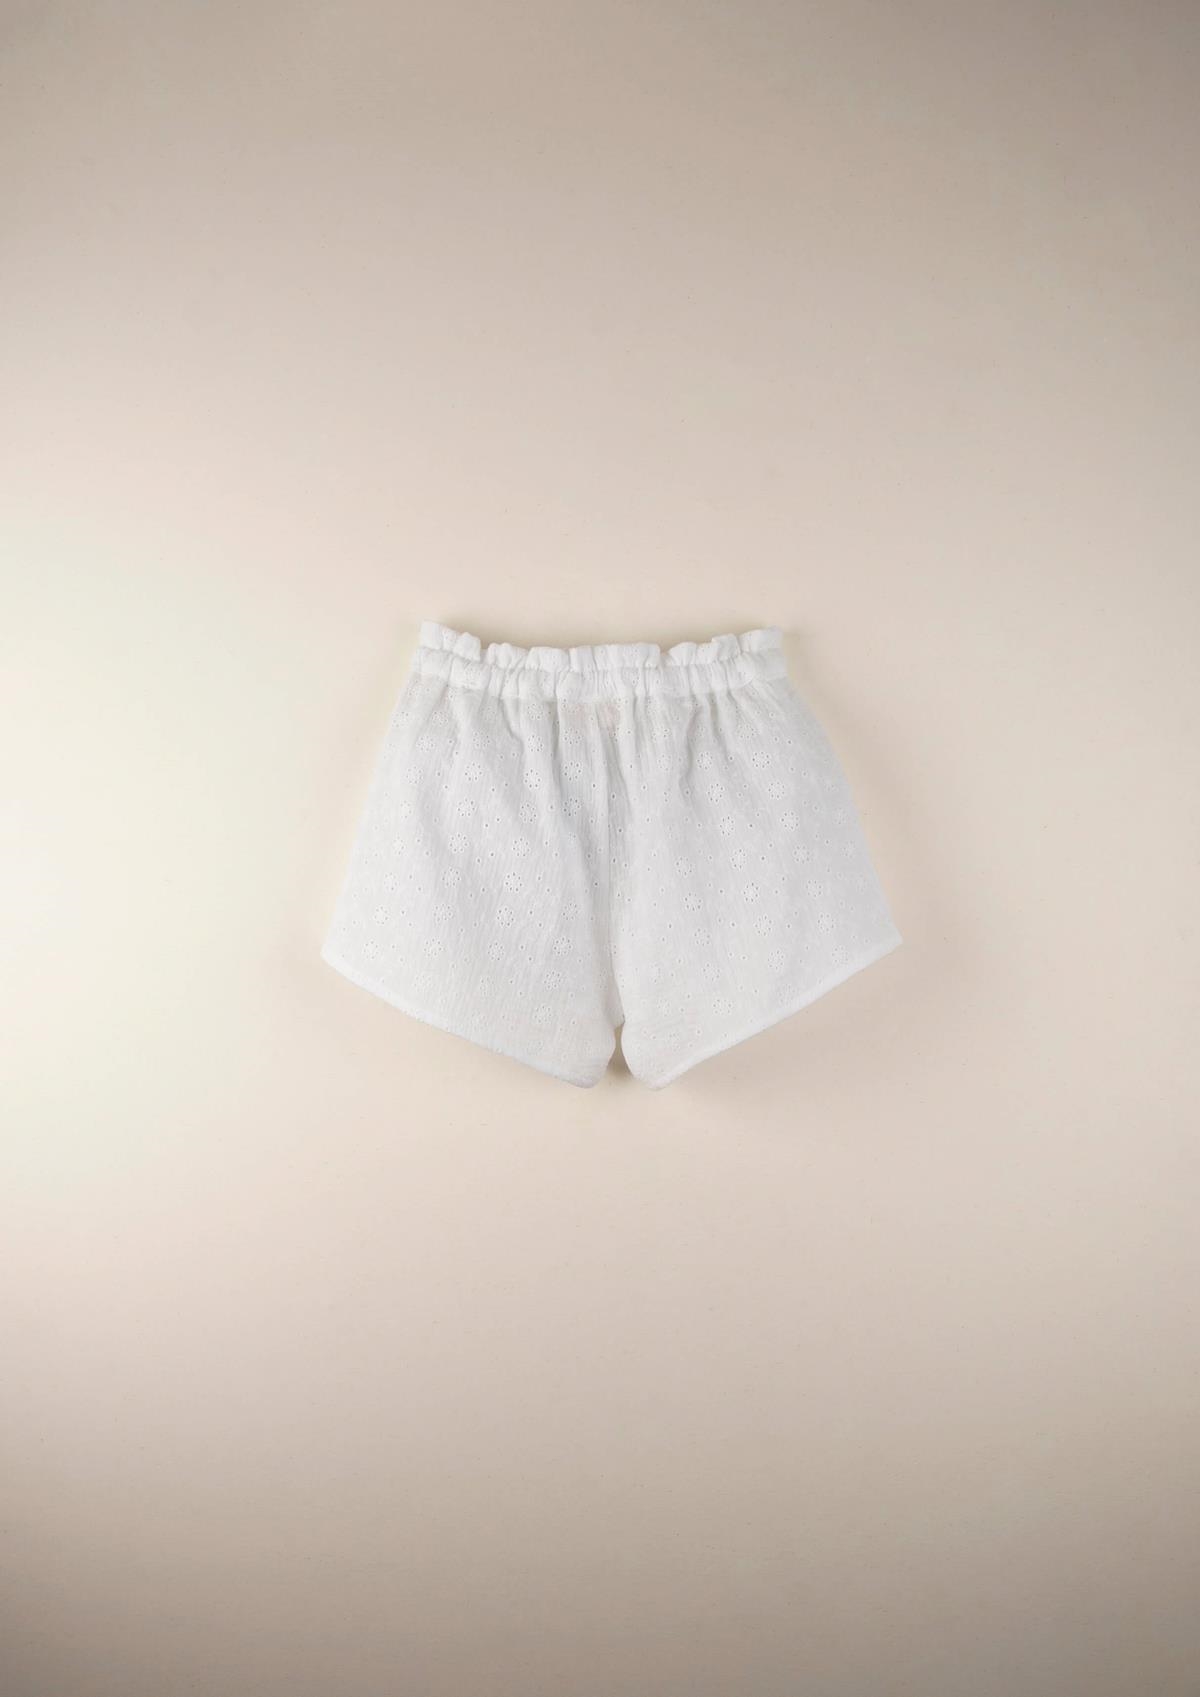 Mod.16.1 Loose organic shorts with Swiss embroidery | SS22 Mod.16.1 Loose organic shorts with Swiss embroidery | 1